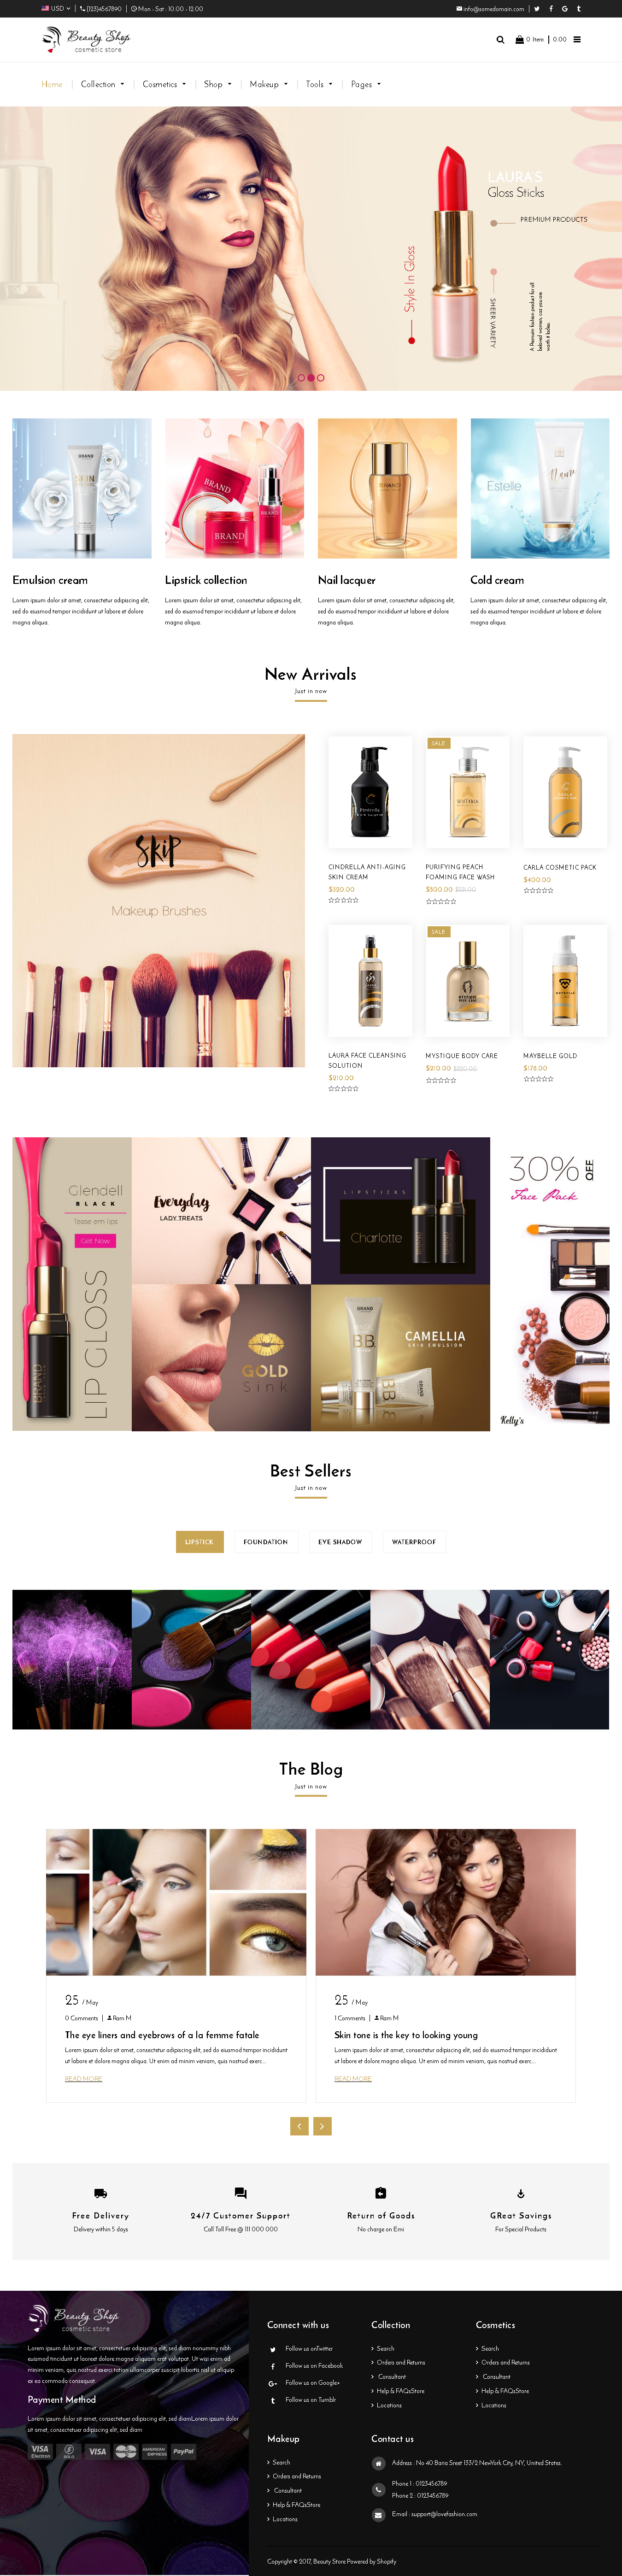 5 Best SHOPIFY Premium Themes Collection for Cosmetics Stores 2017 -Beauty – Cosmetics and Fashion Beauty Shopify Theme